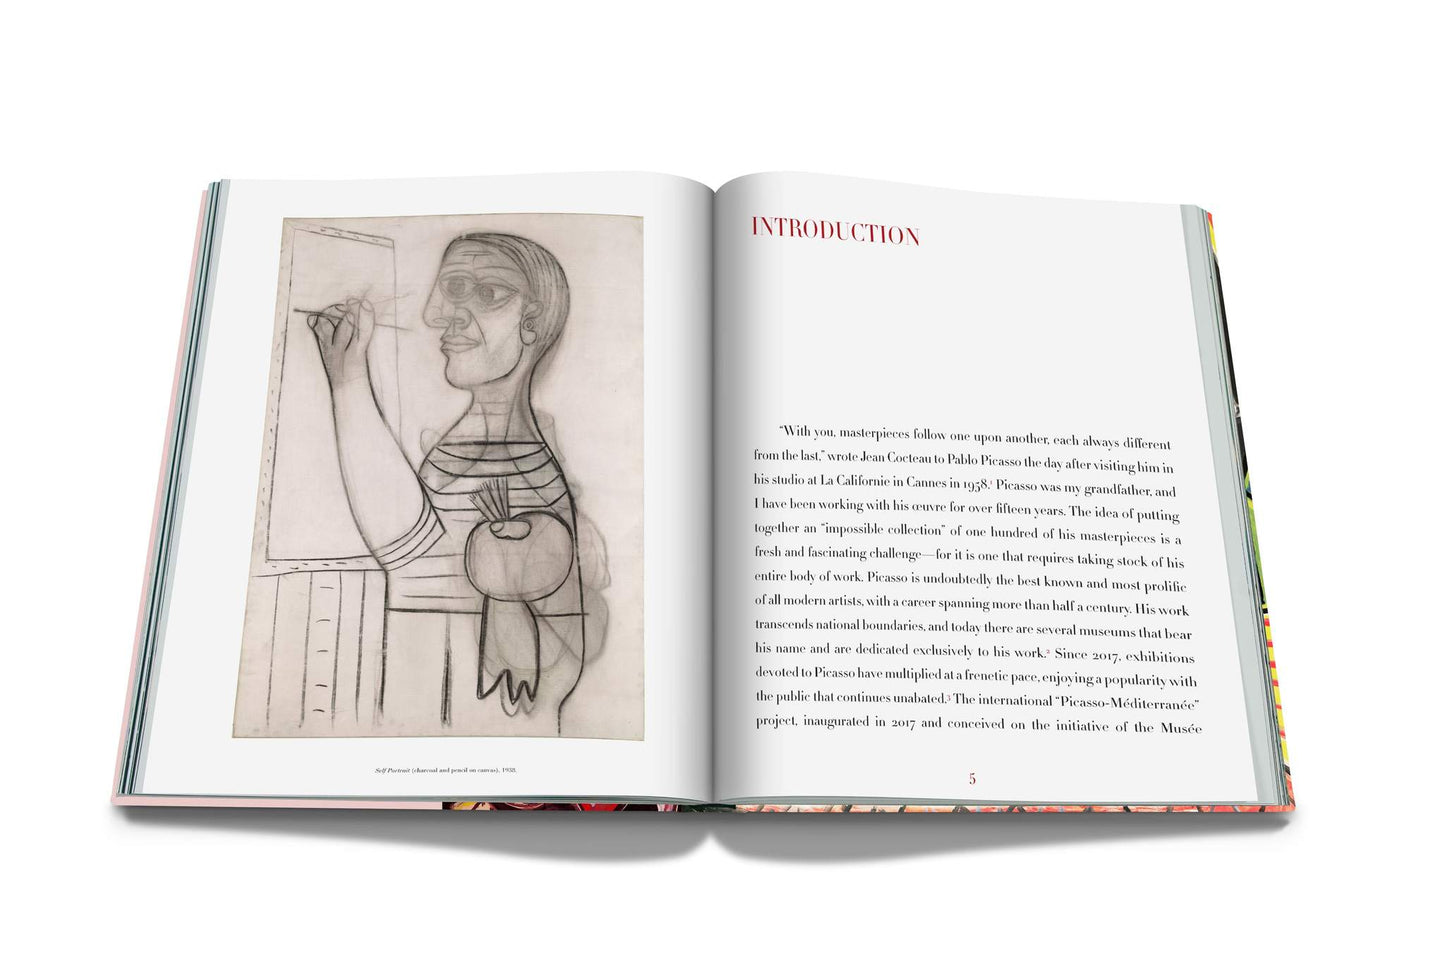 Book Pablo Picasso: Impossible collection